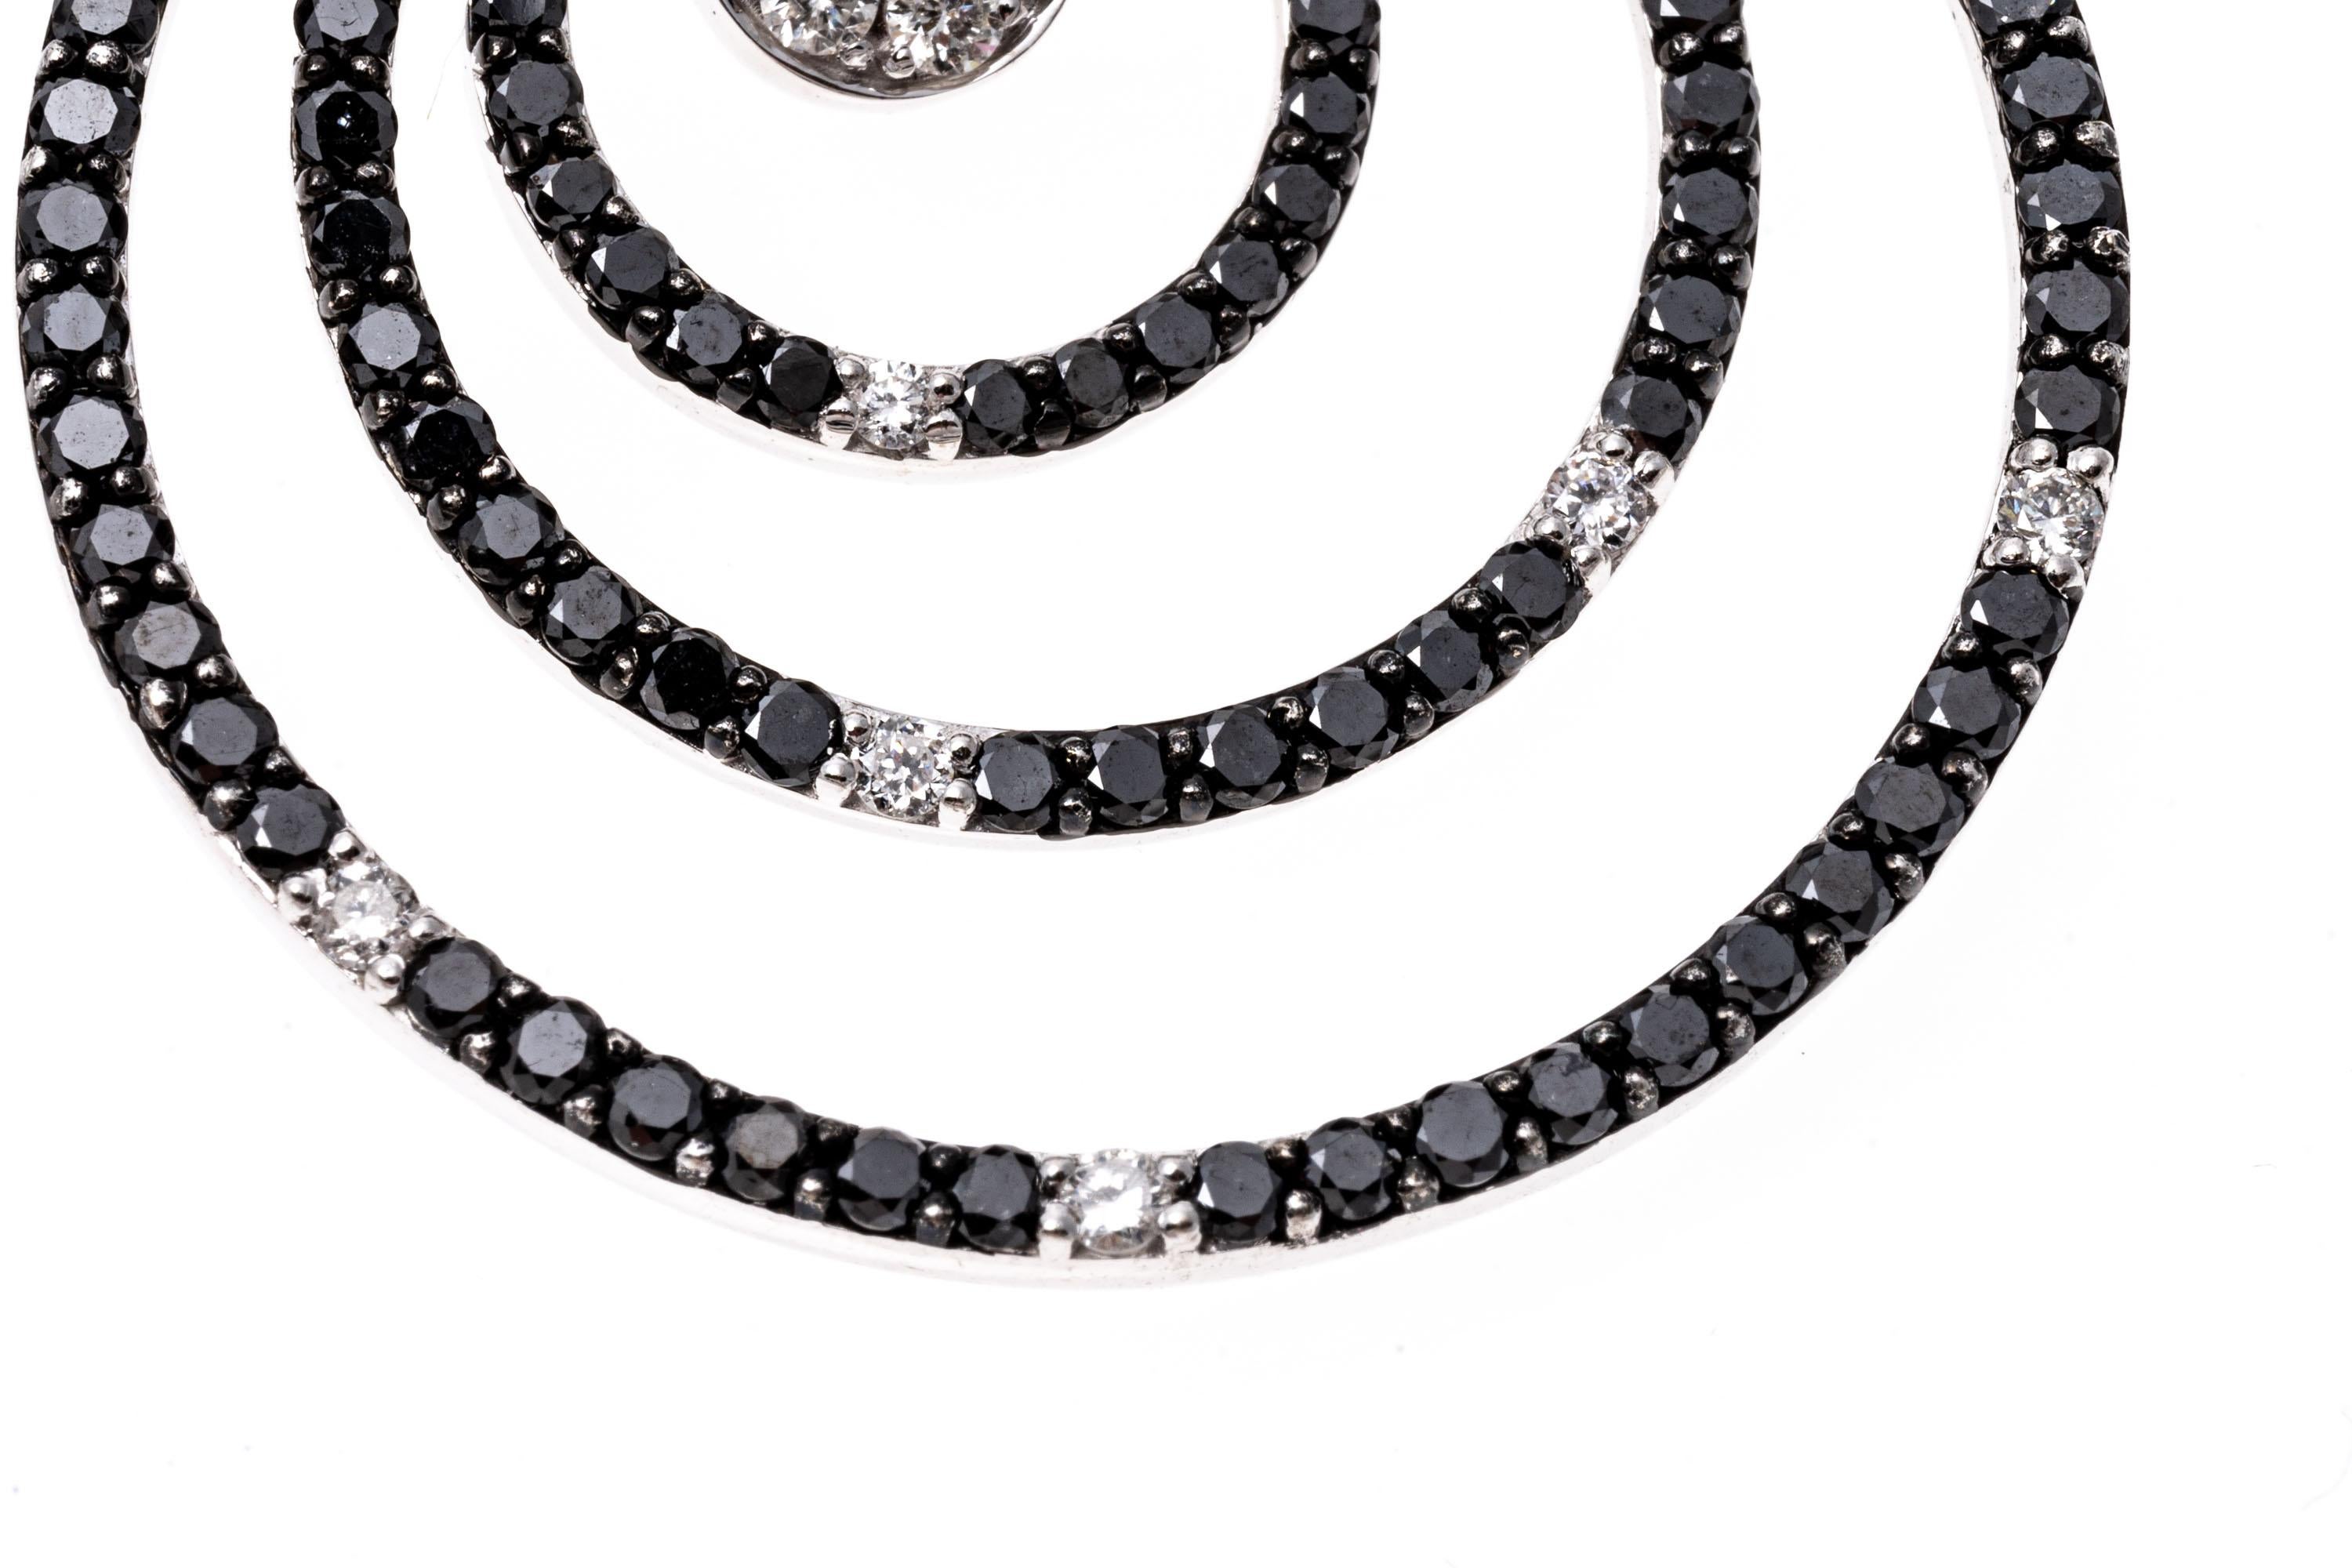 14k white gold earrings. These mod earrings contain a small round top, set with round faceted white diamonds; suspended from the top are three round concentric circles, set with black round faceted diamonds, prong set. Set within the center circle